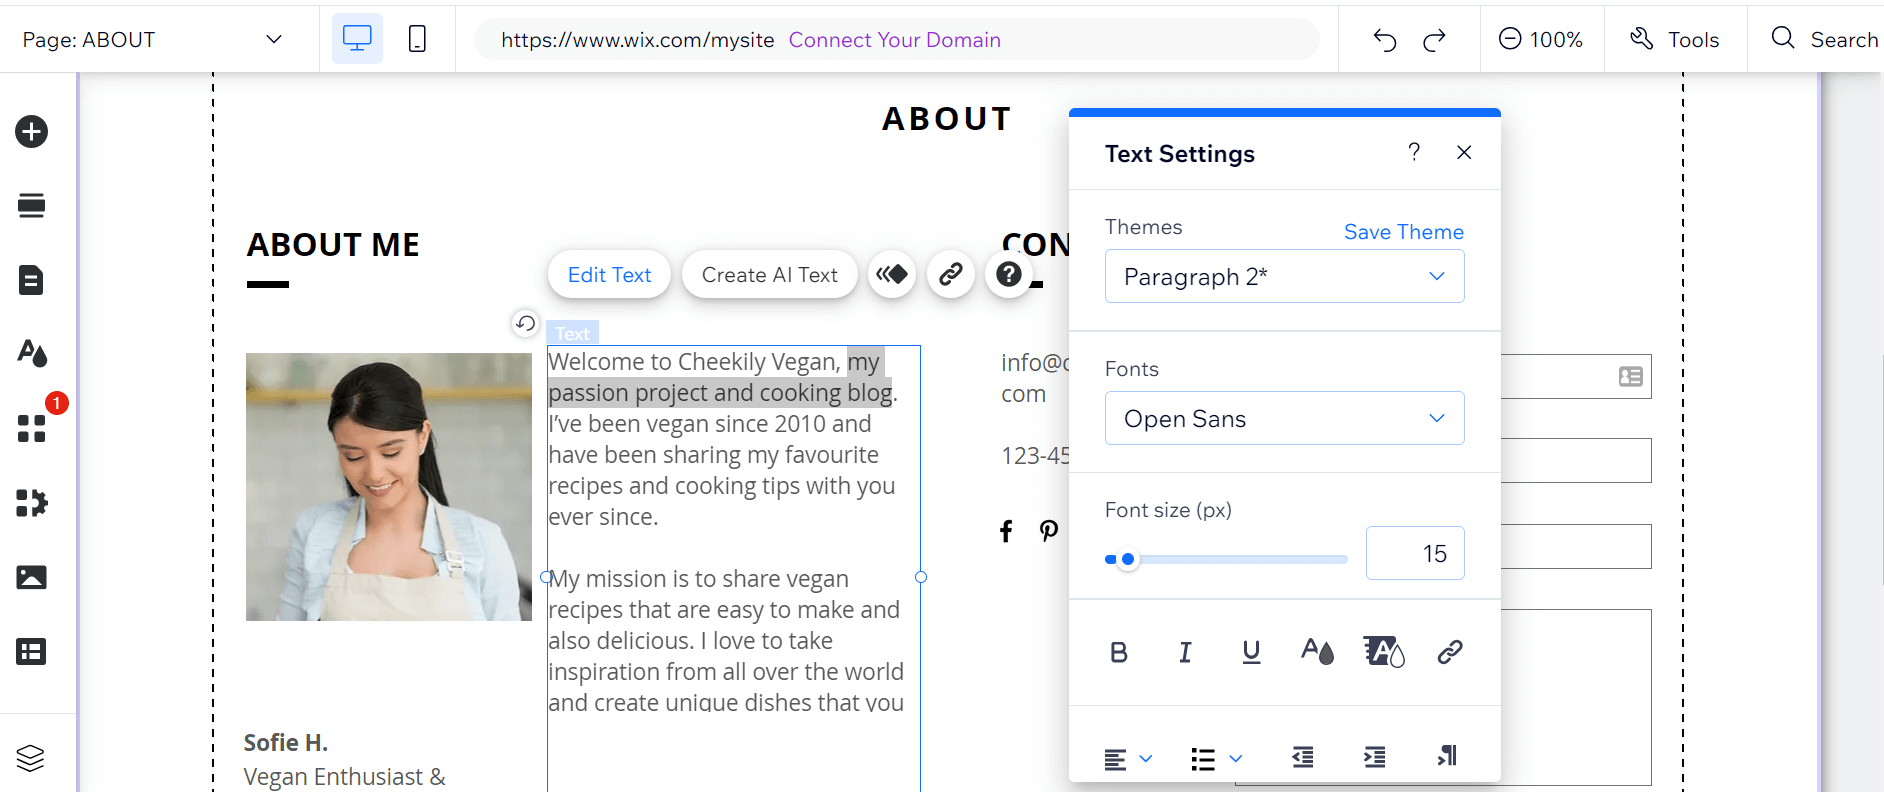 Editing text on a Wix demo website using the Wix text editor